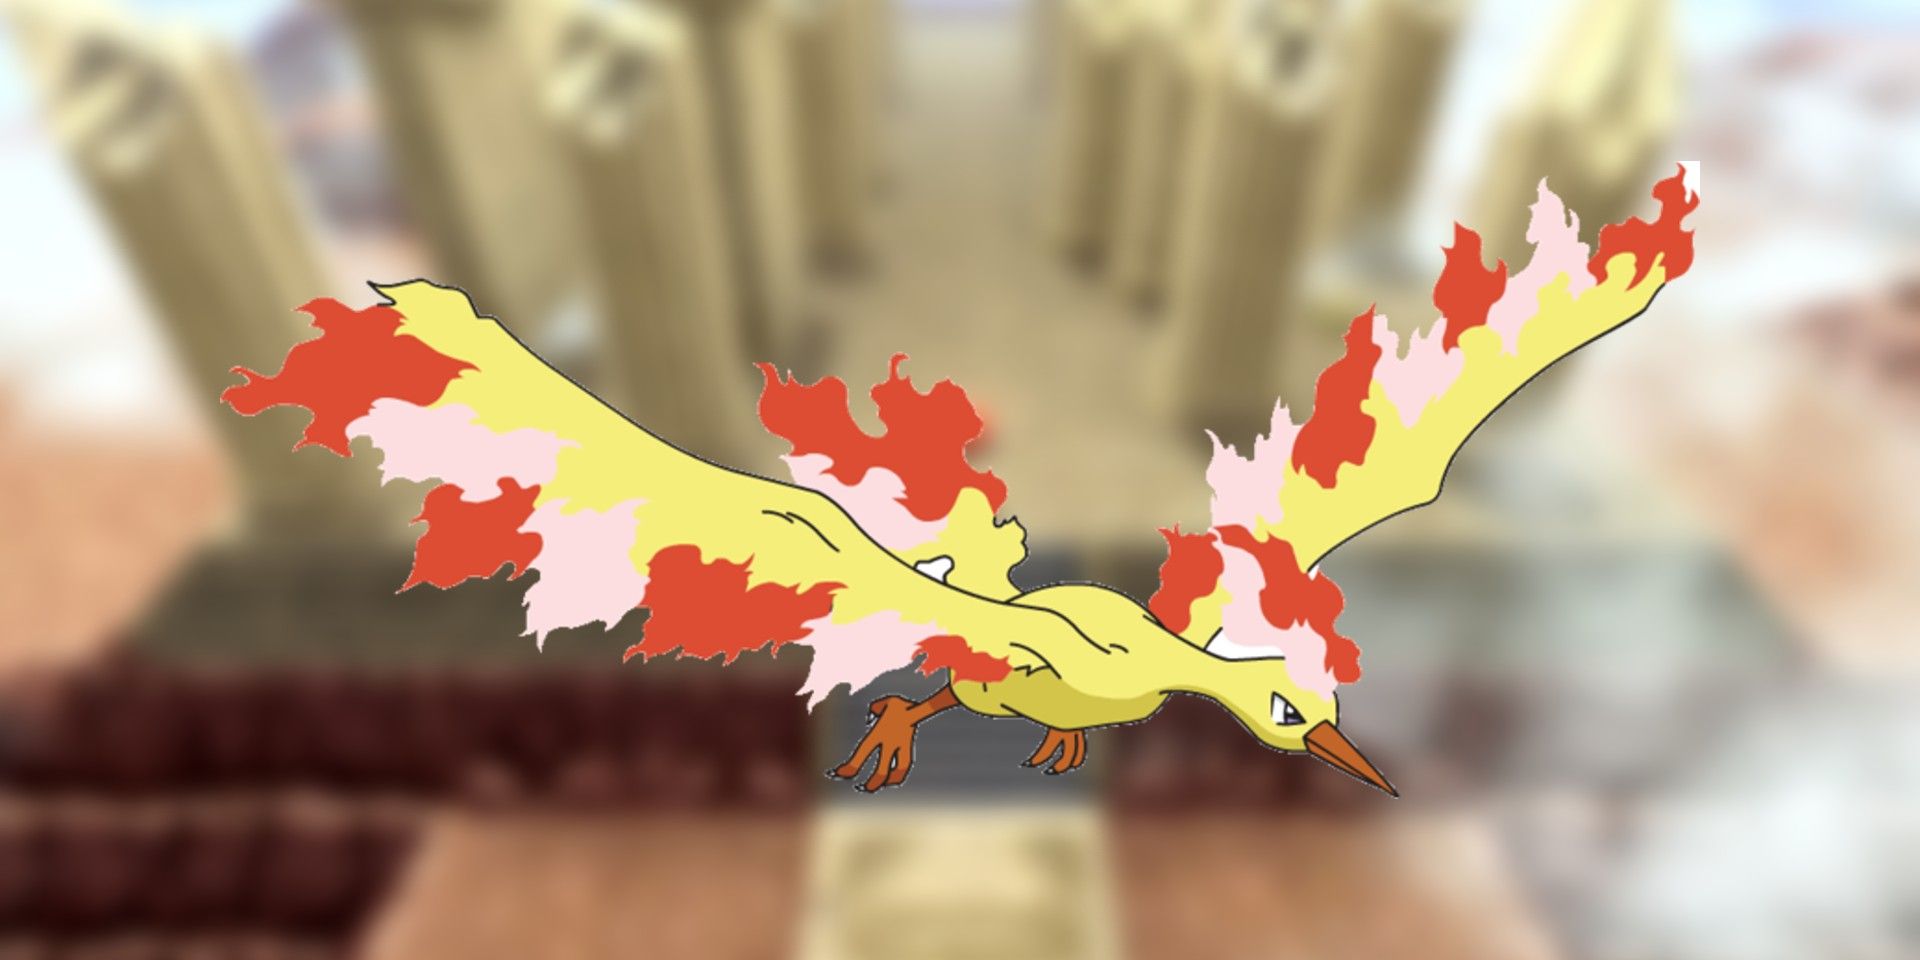 Artwork of Moltres in Pokémon Brilliant Diamond and Shining Pearl over a blurry background of ruins